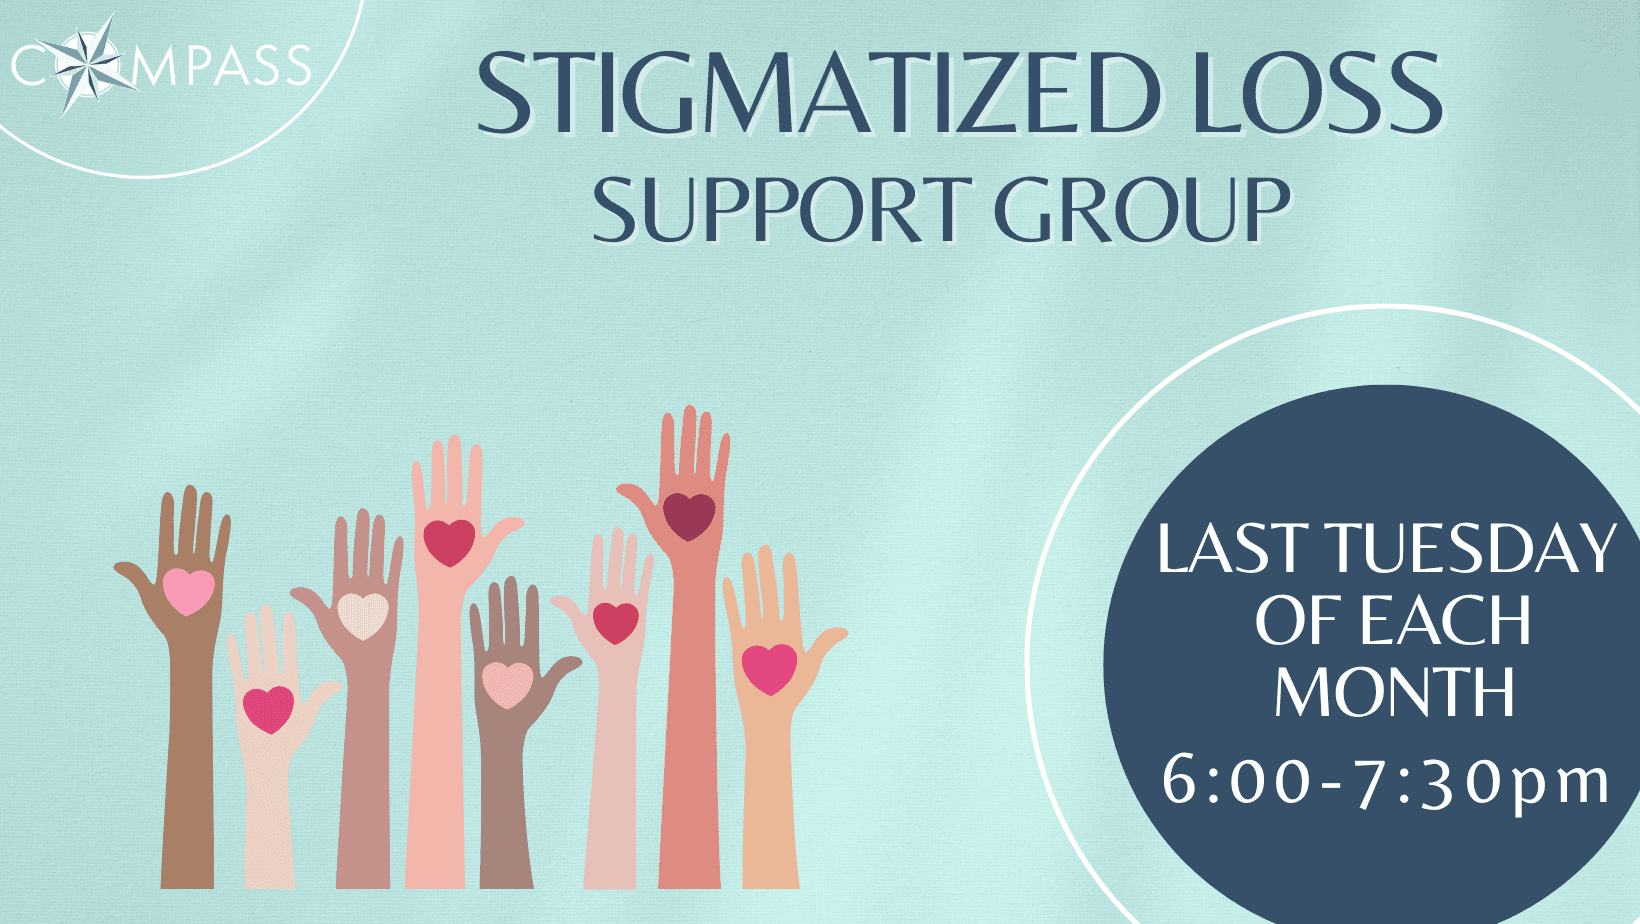 Stigmatized Loss Support Group